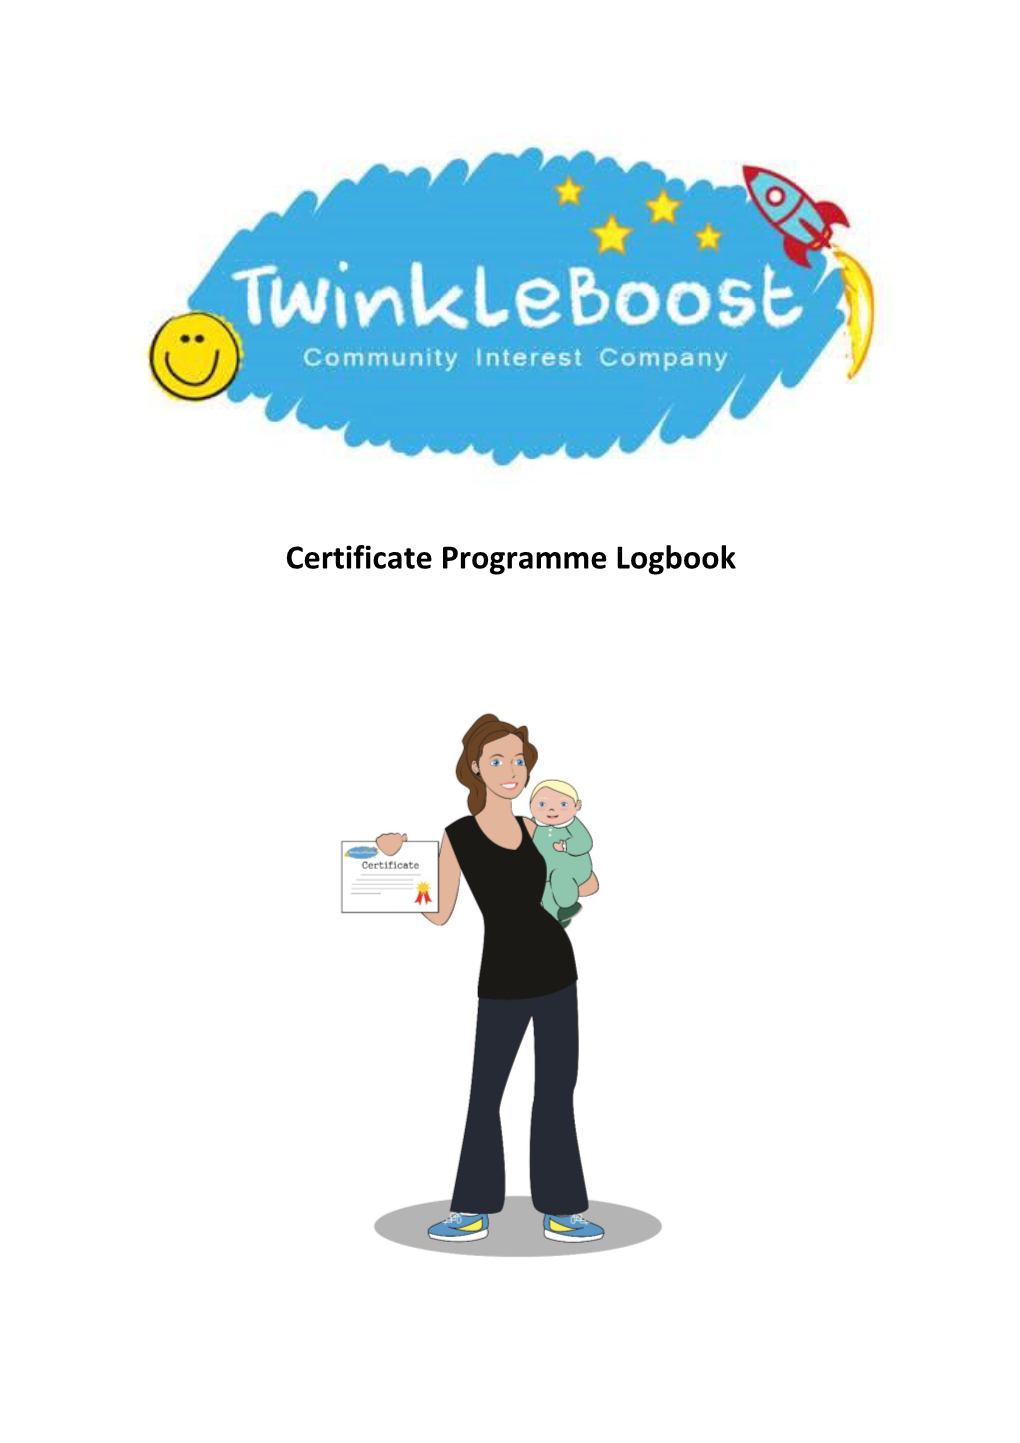 What Is the Certificate Programme?